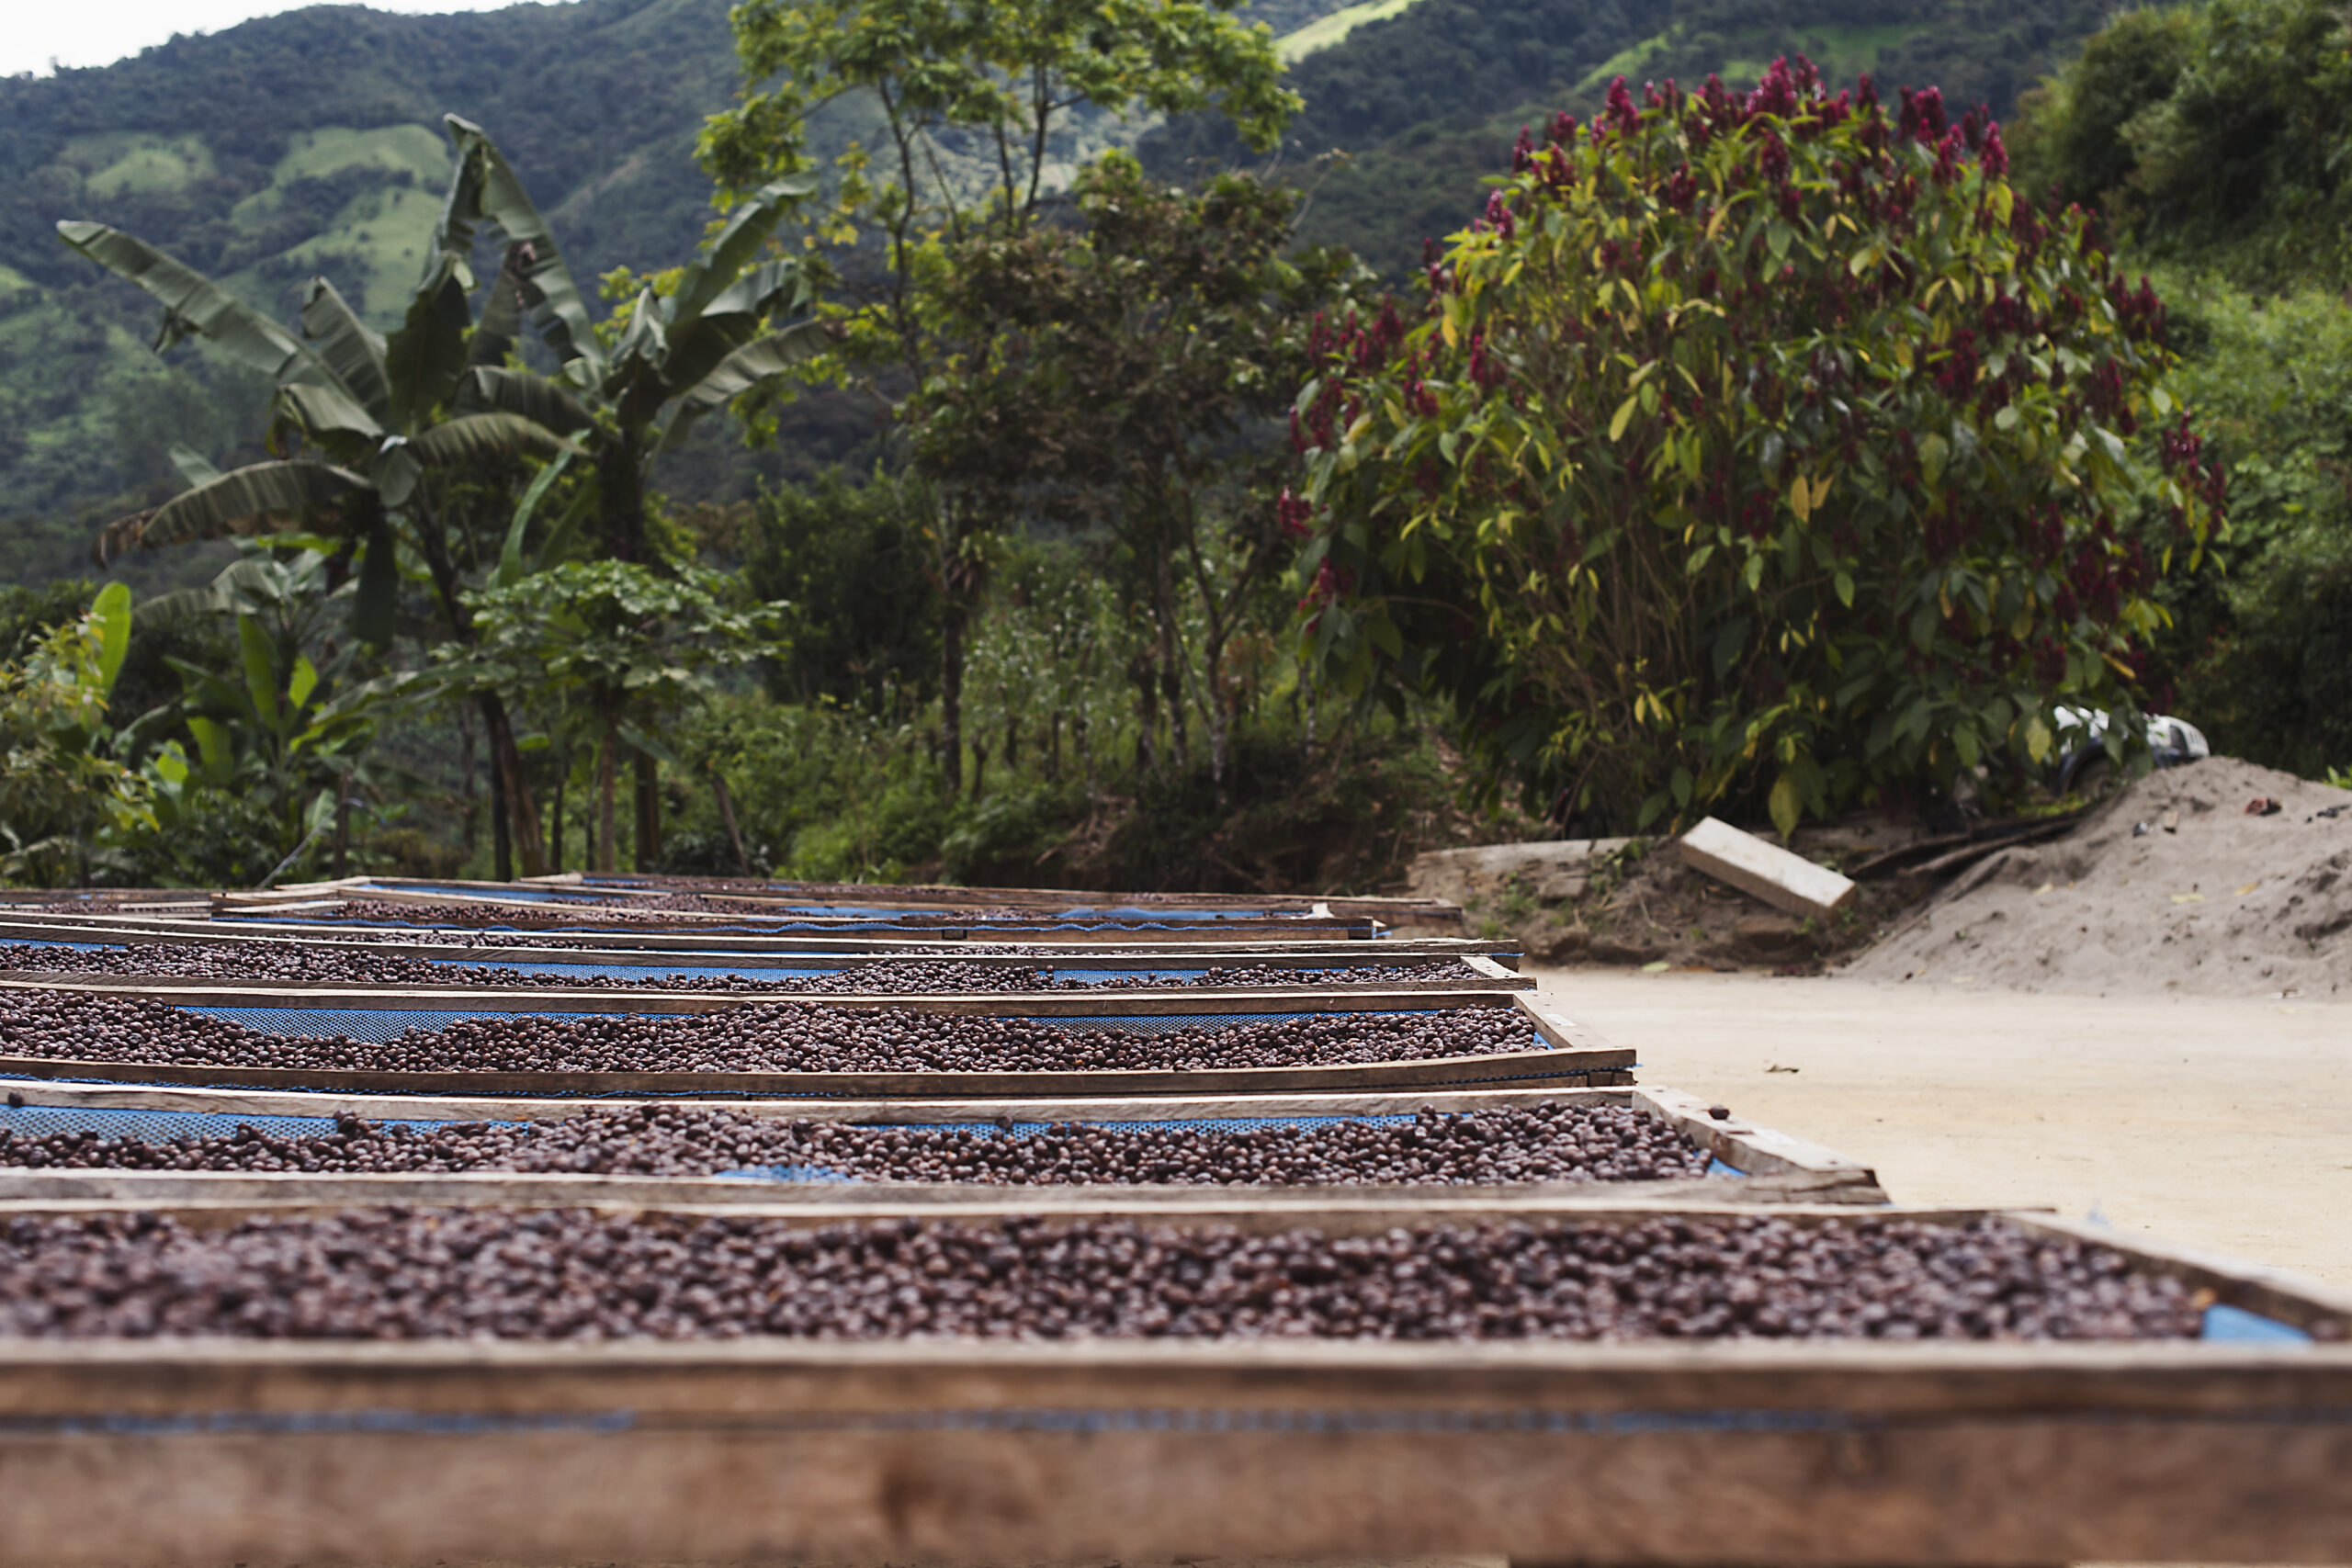 ethically sourced coffee beans